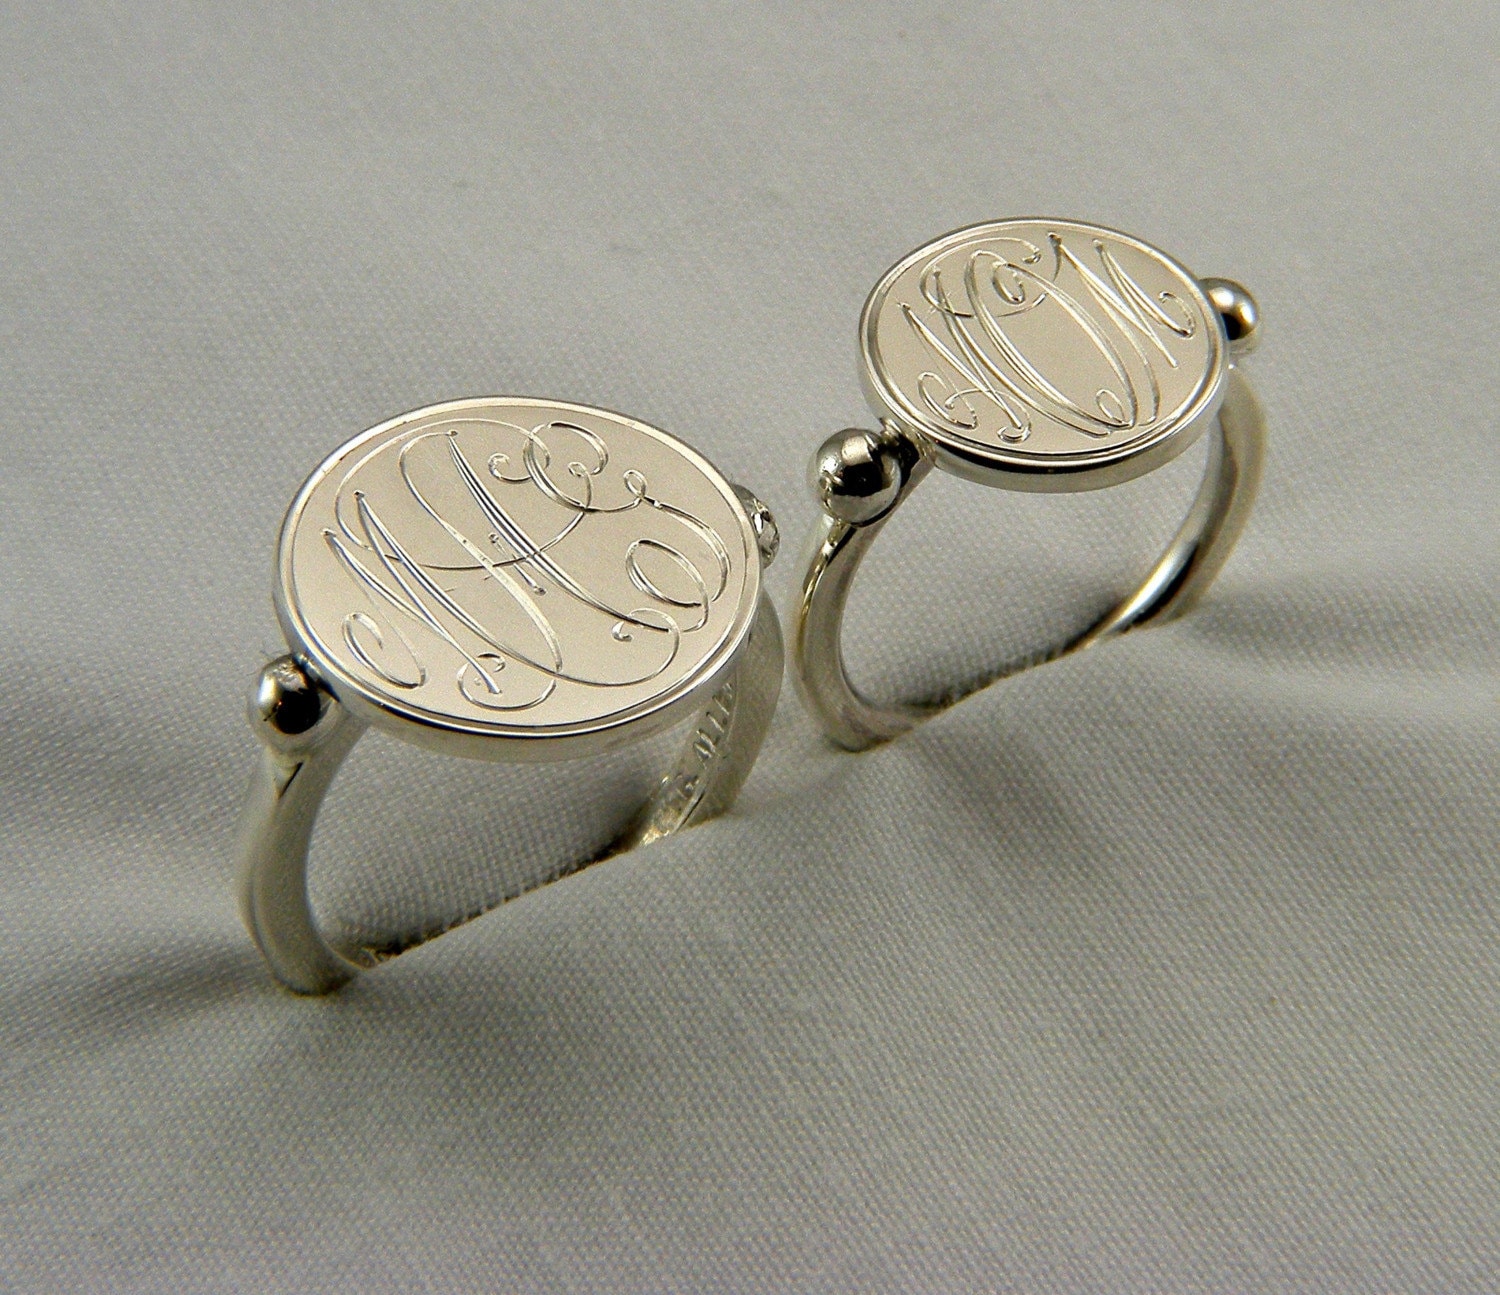 MONOGRAM RING Sterling Silver by ElmhillDesigns on Etsy